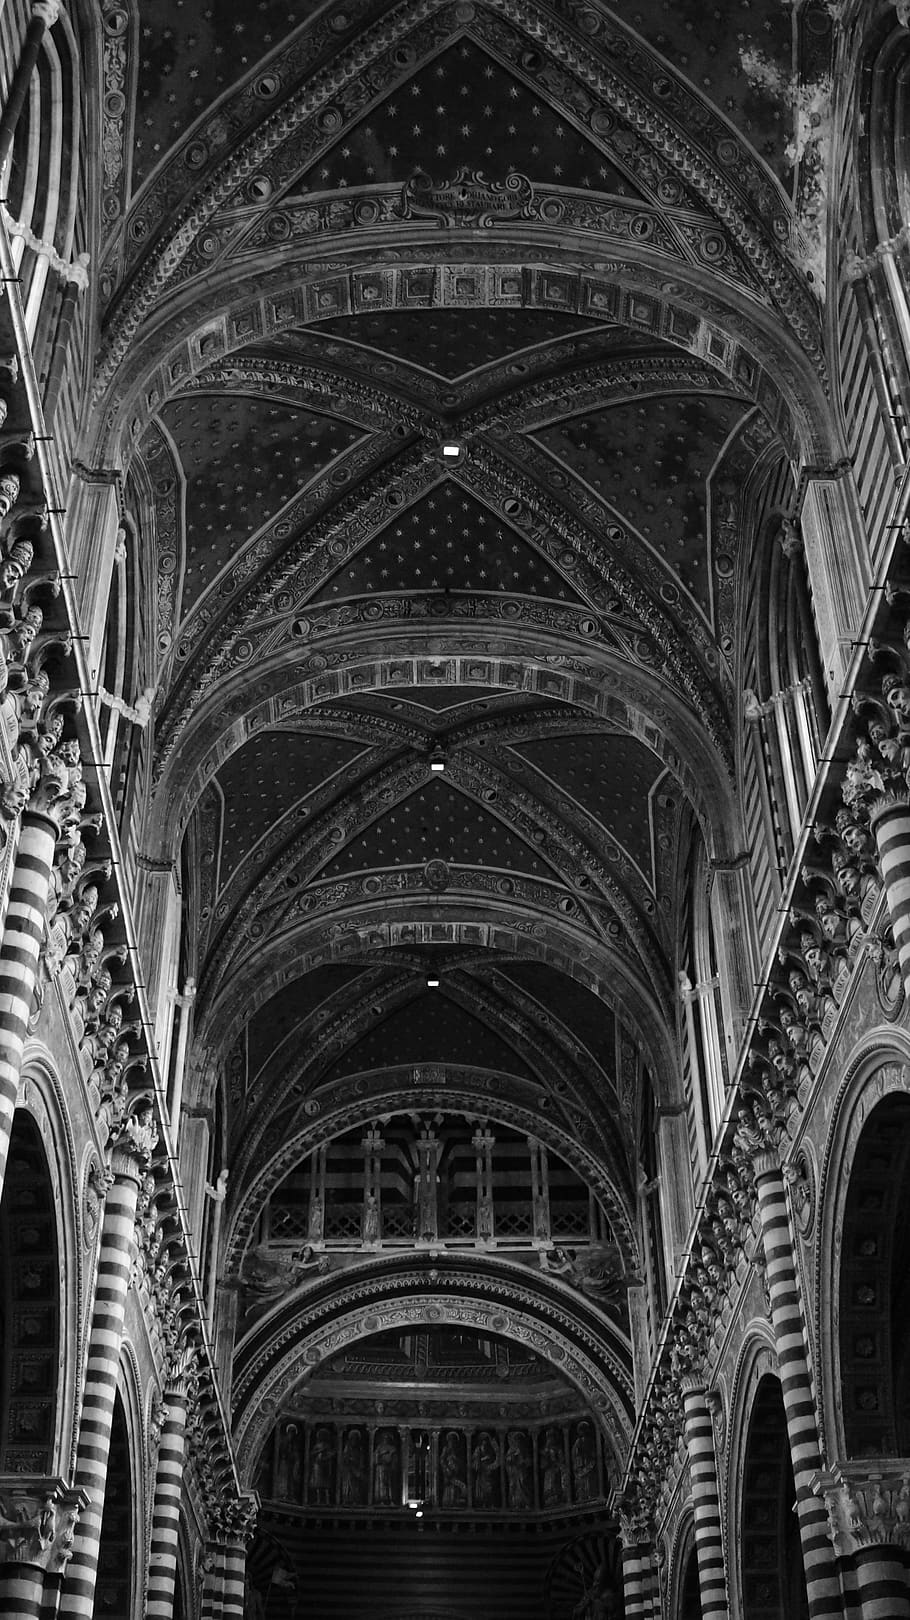 siena, church, tuscany, italy, ceiling, gothic, cathedral, black, white, dome